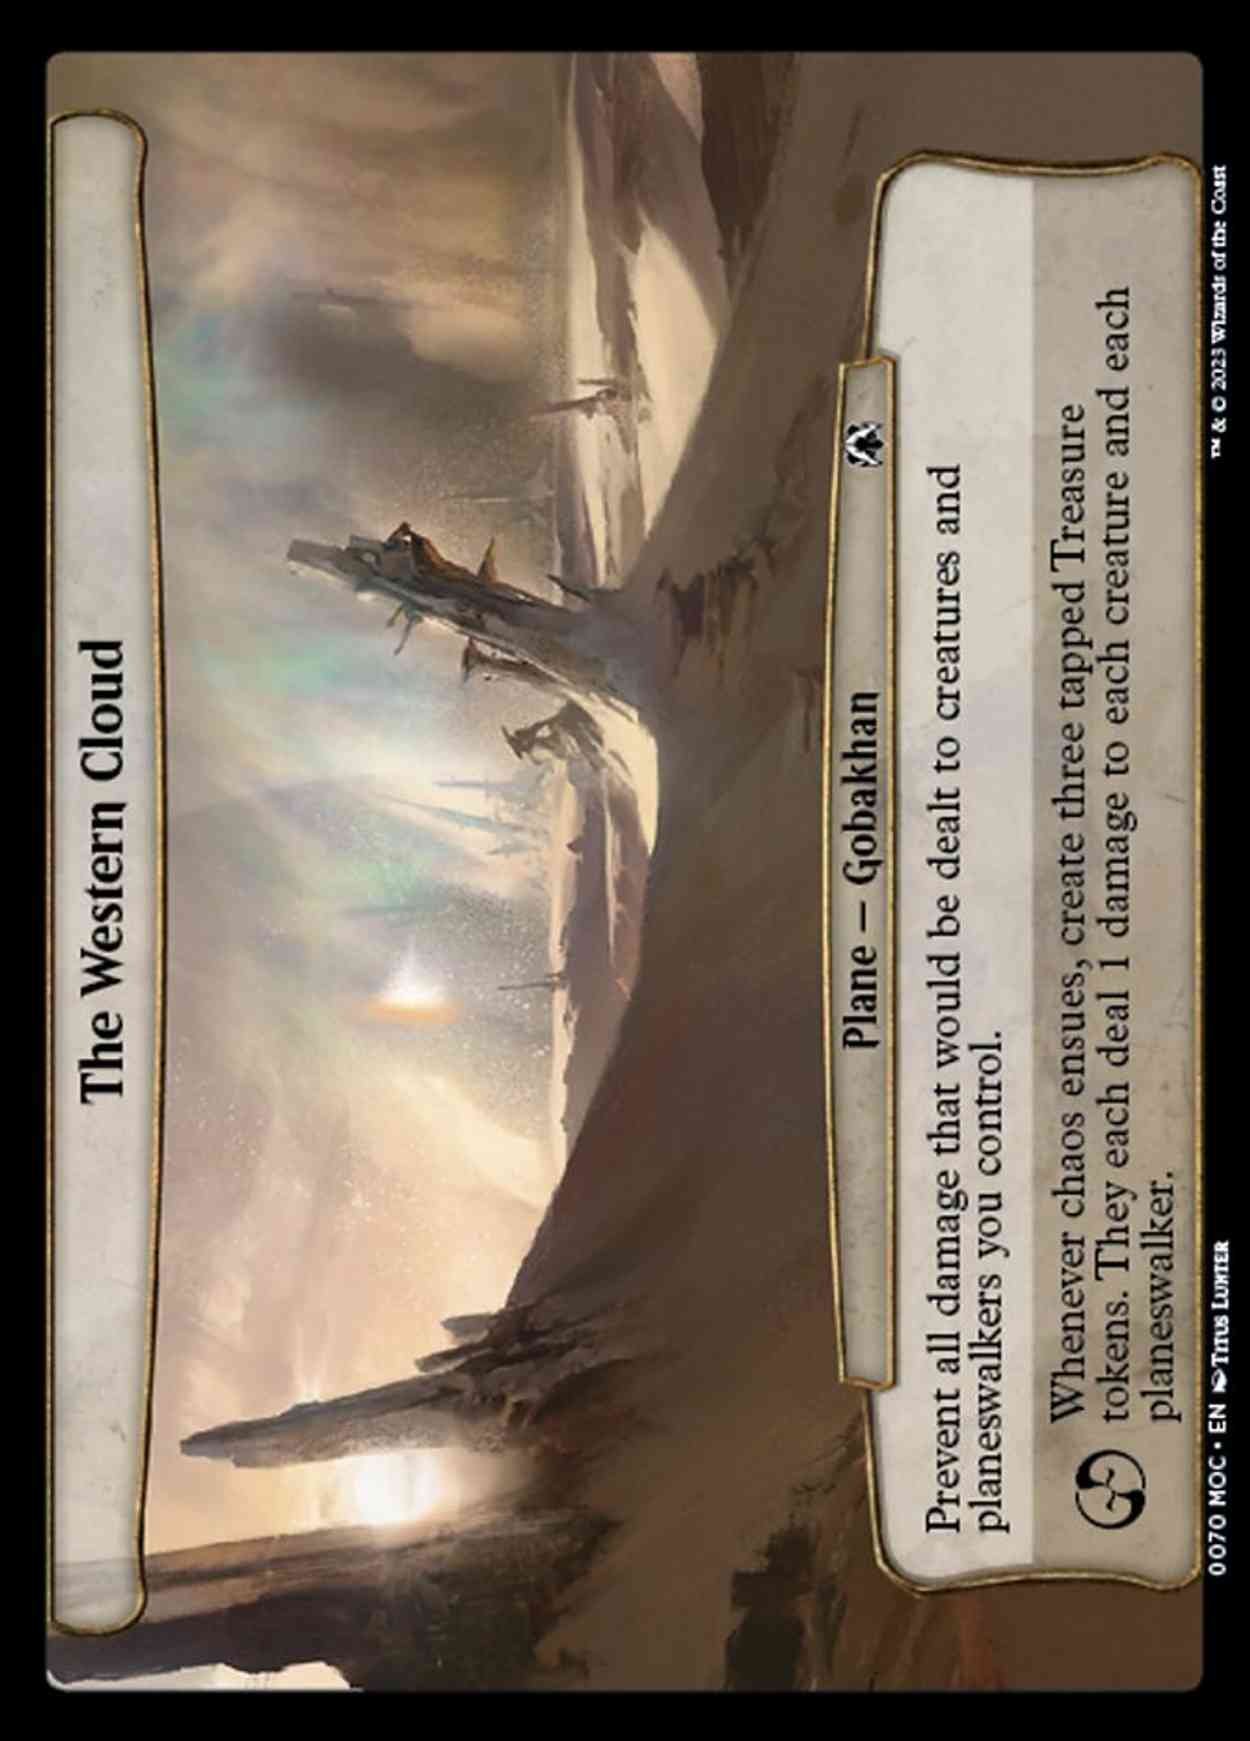 The Western Cloud magic card front